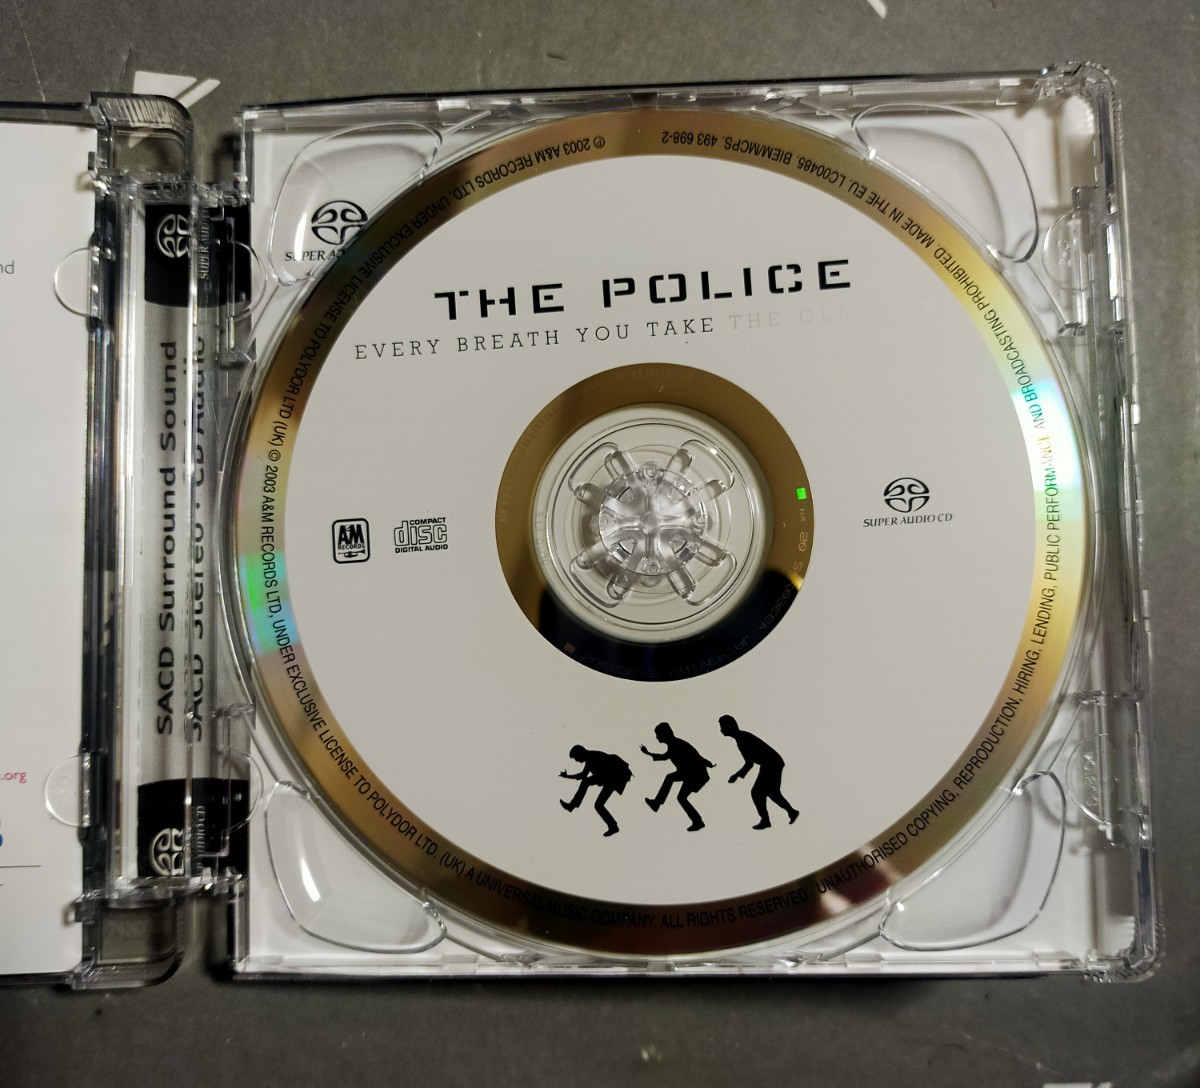 THE POLICE／EVERY BREATH YOU TAKE THE CLASSICS　ハイブリッドSACD　STEREO/Surround Sound　493 698 -2 輸入盤_画像2